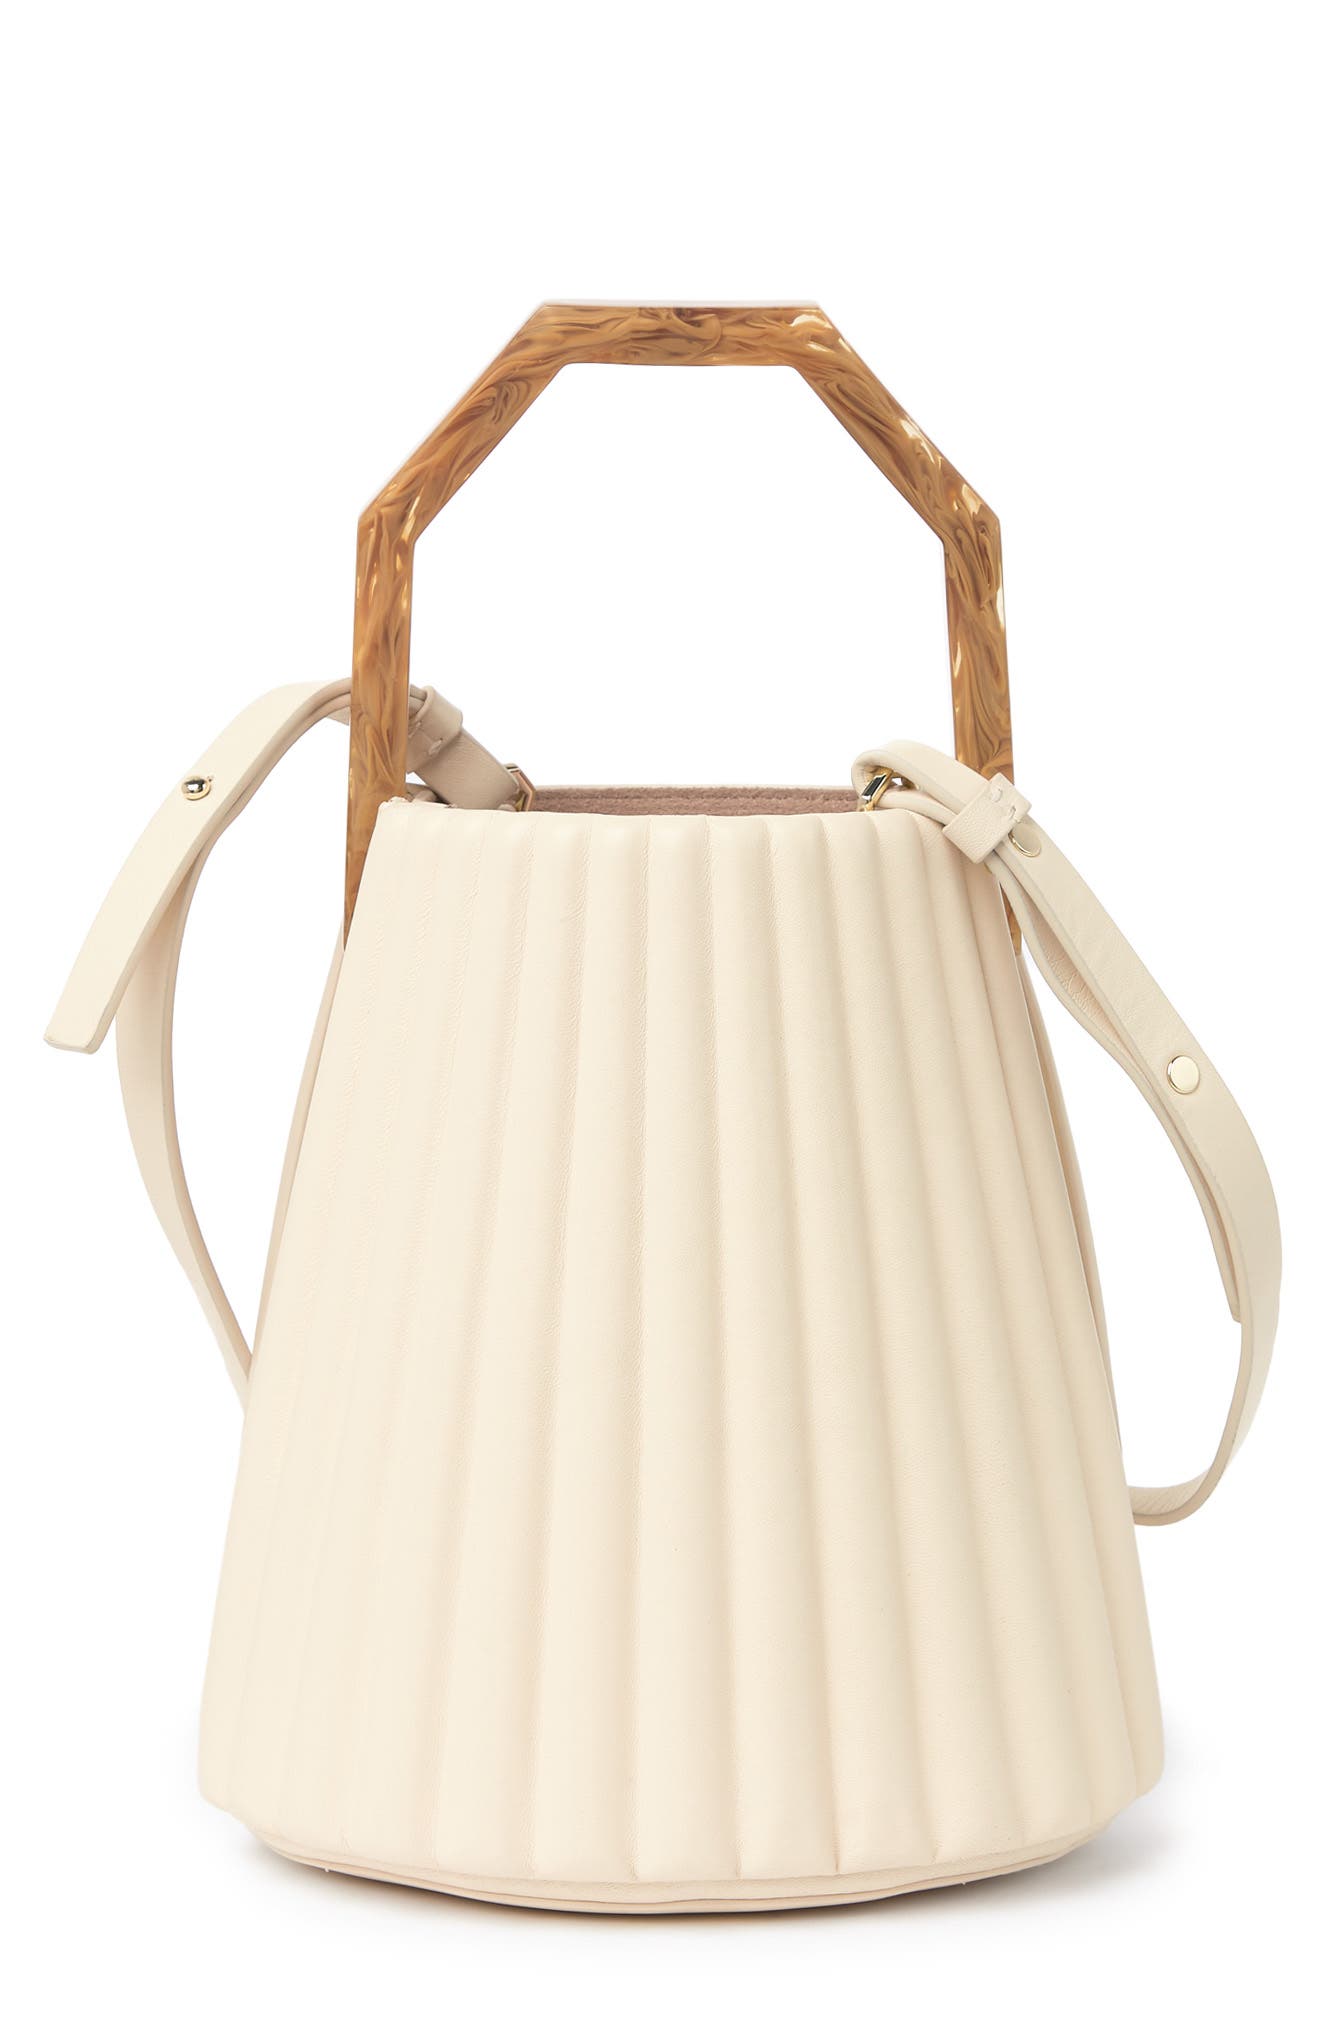 Louise et Cie on X: Both color ways of the Alez bucket bag are perfect for  every look. Shop your new new spring go-to at @netaporter. #LouiseEtCie  #NetaPorter  / X